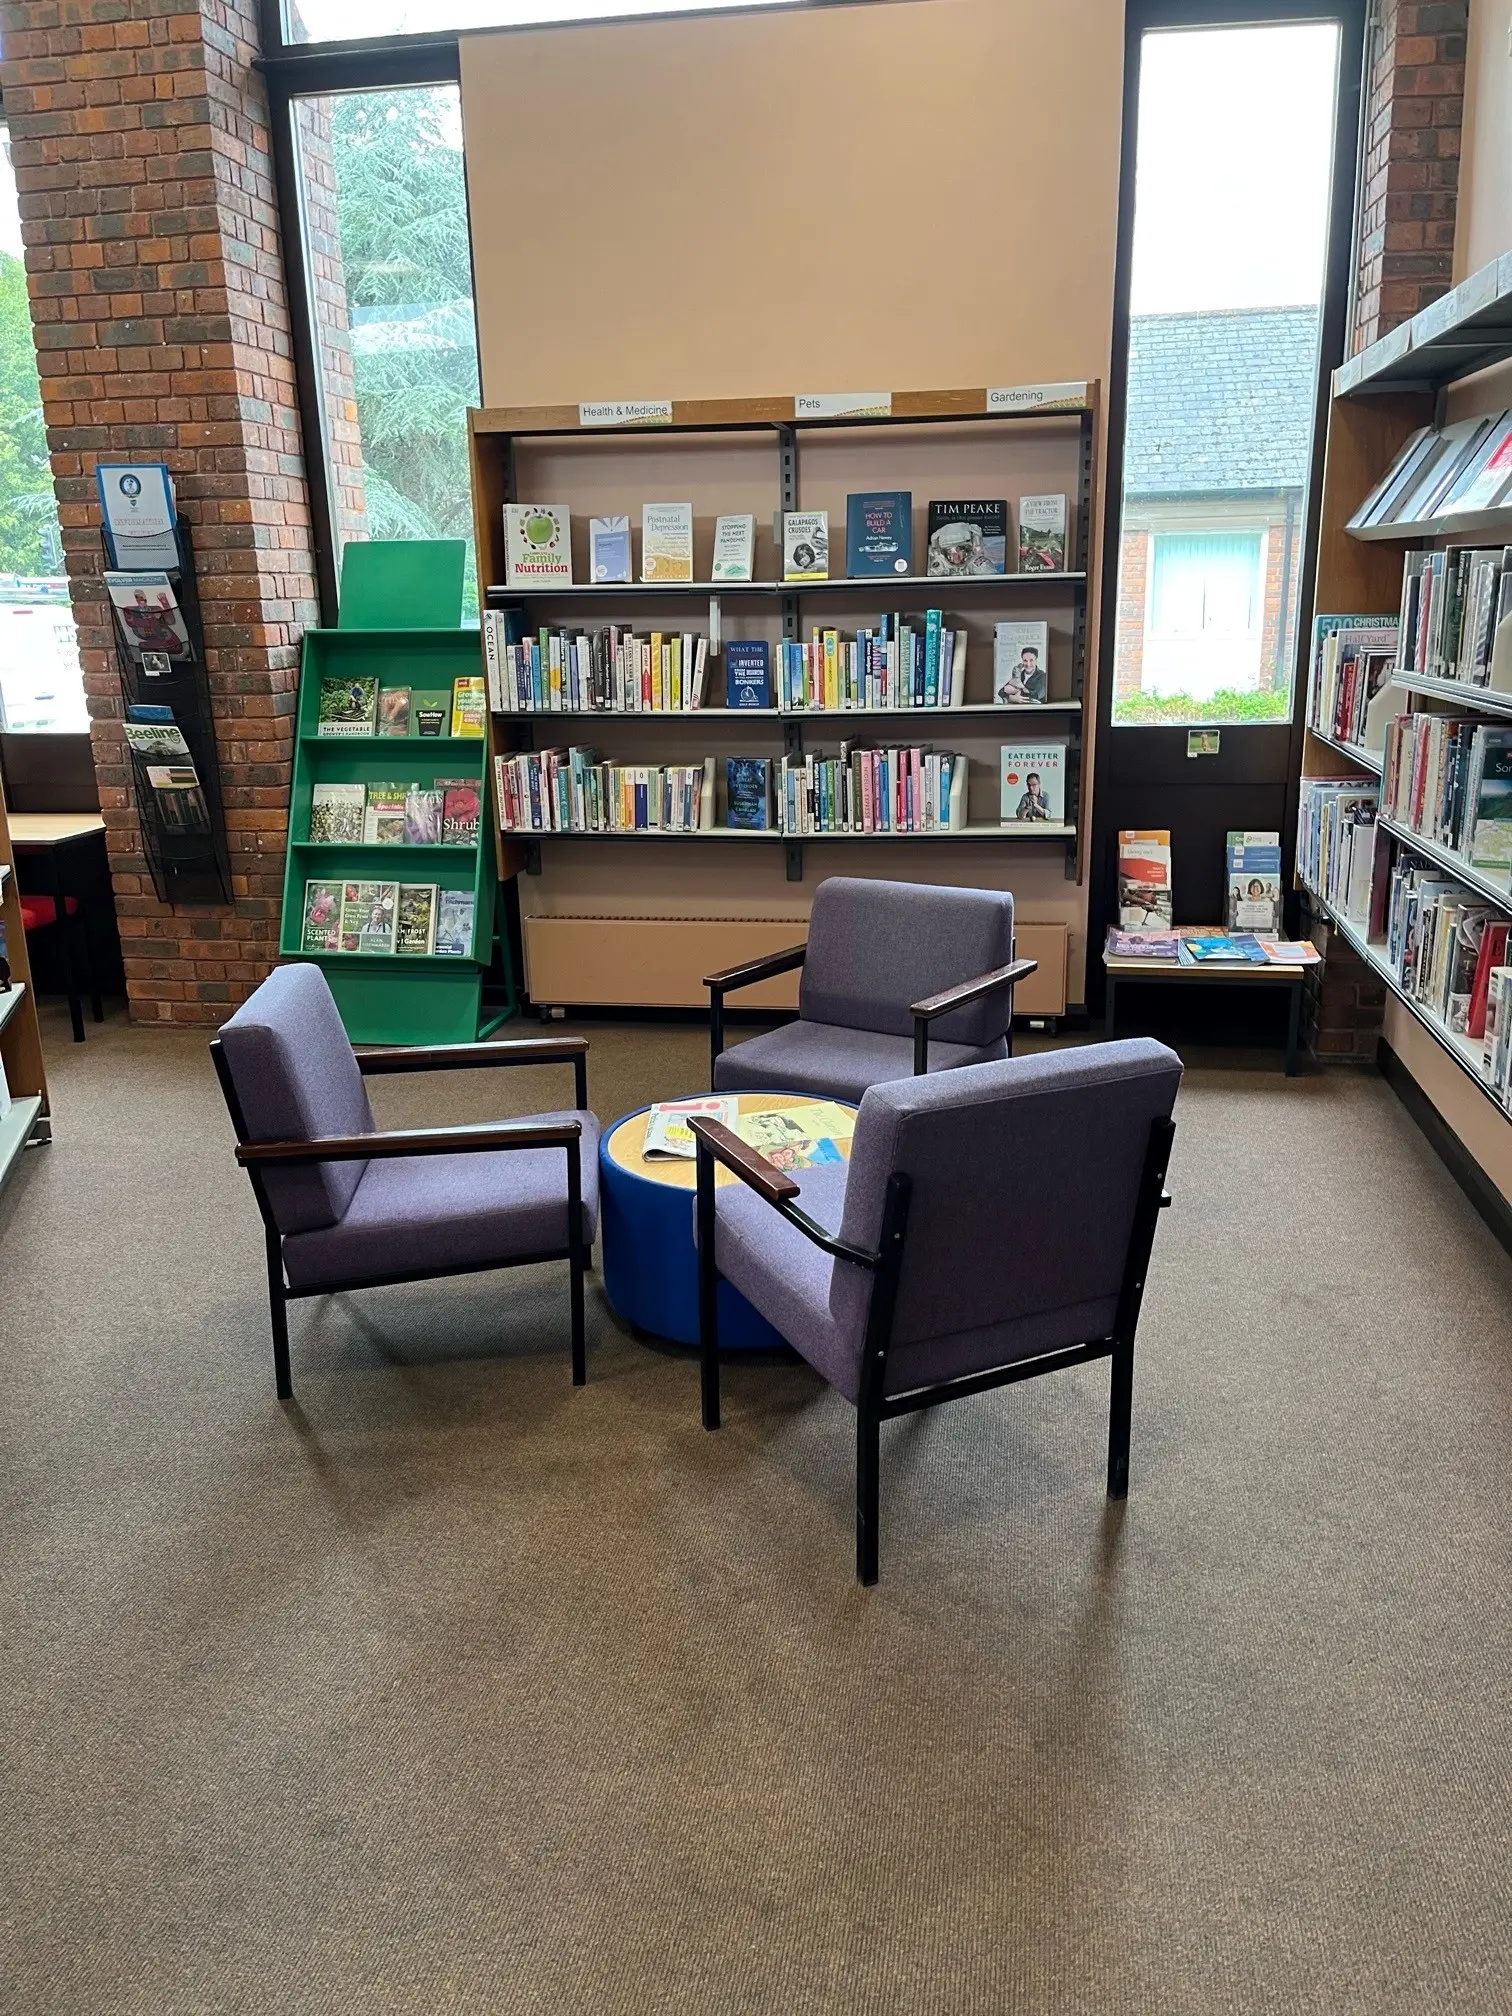 This is a picture of three chairs around a small round table with book shelves to the back and on either side.